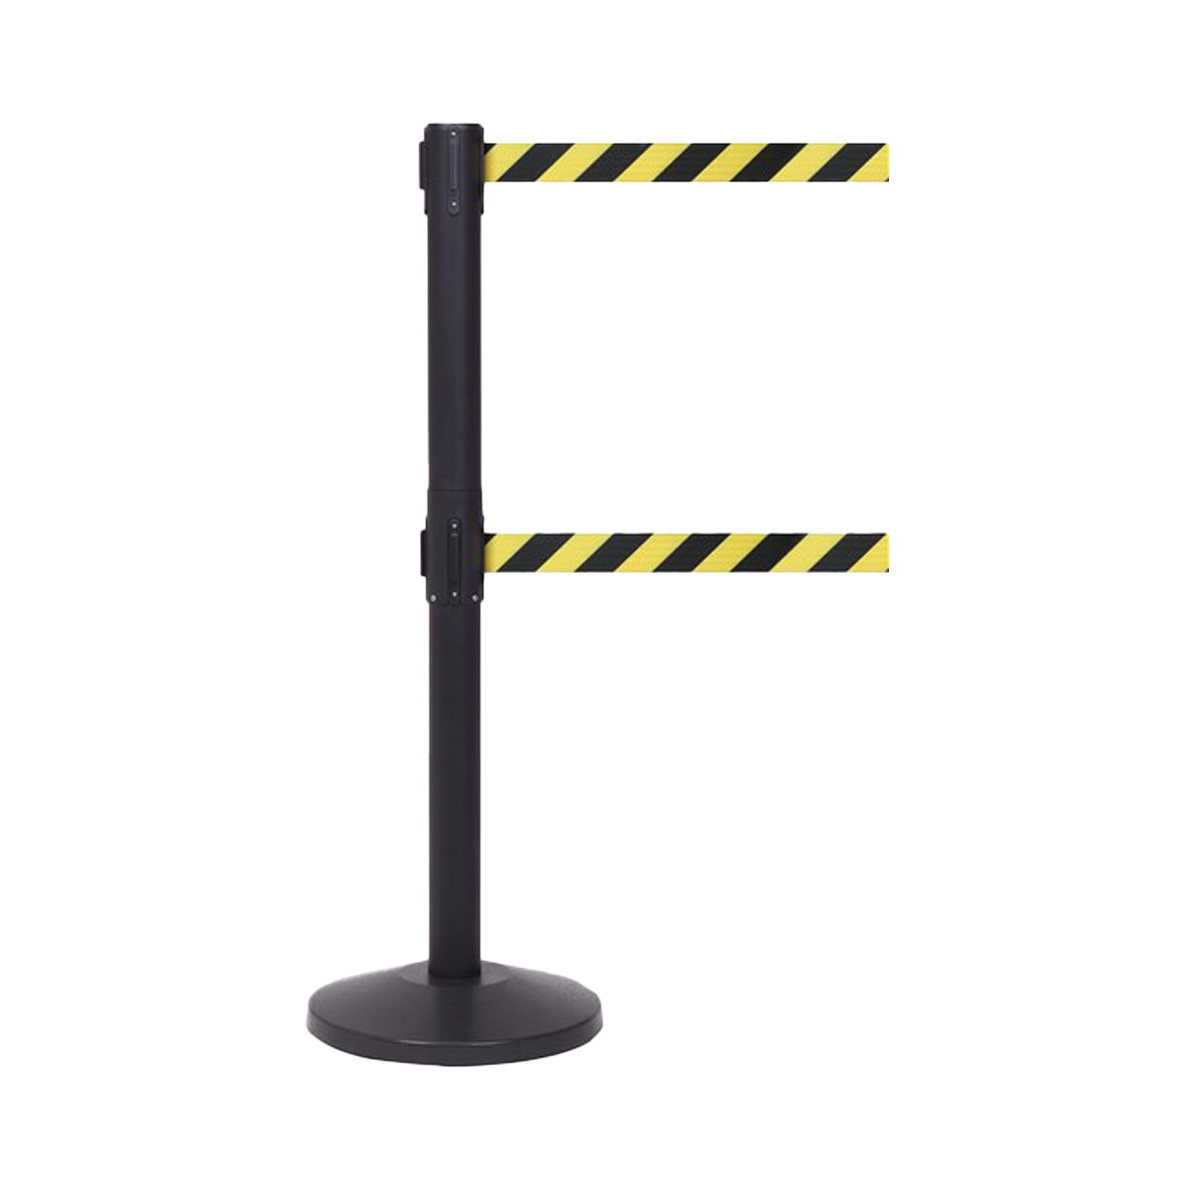 QueueMaster Dual Belt Barriers Include Two 3.4m Long Retracting Tapes